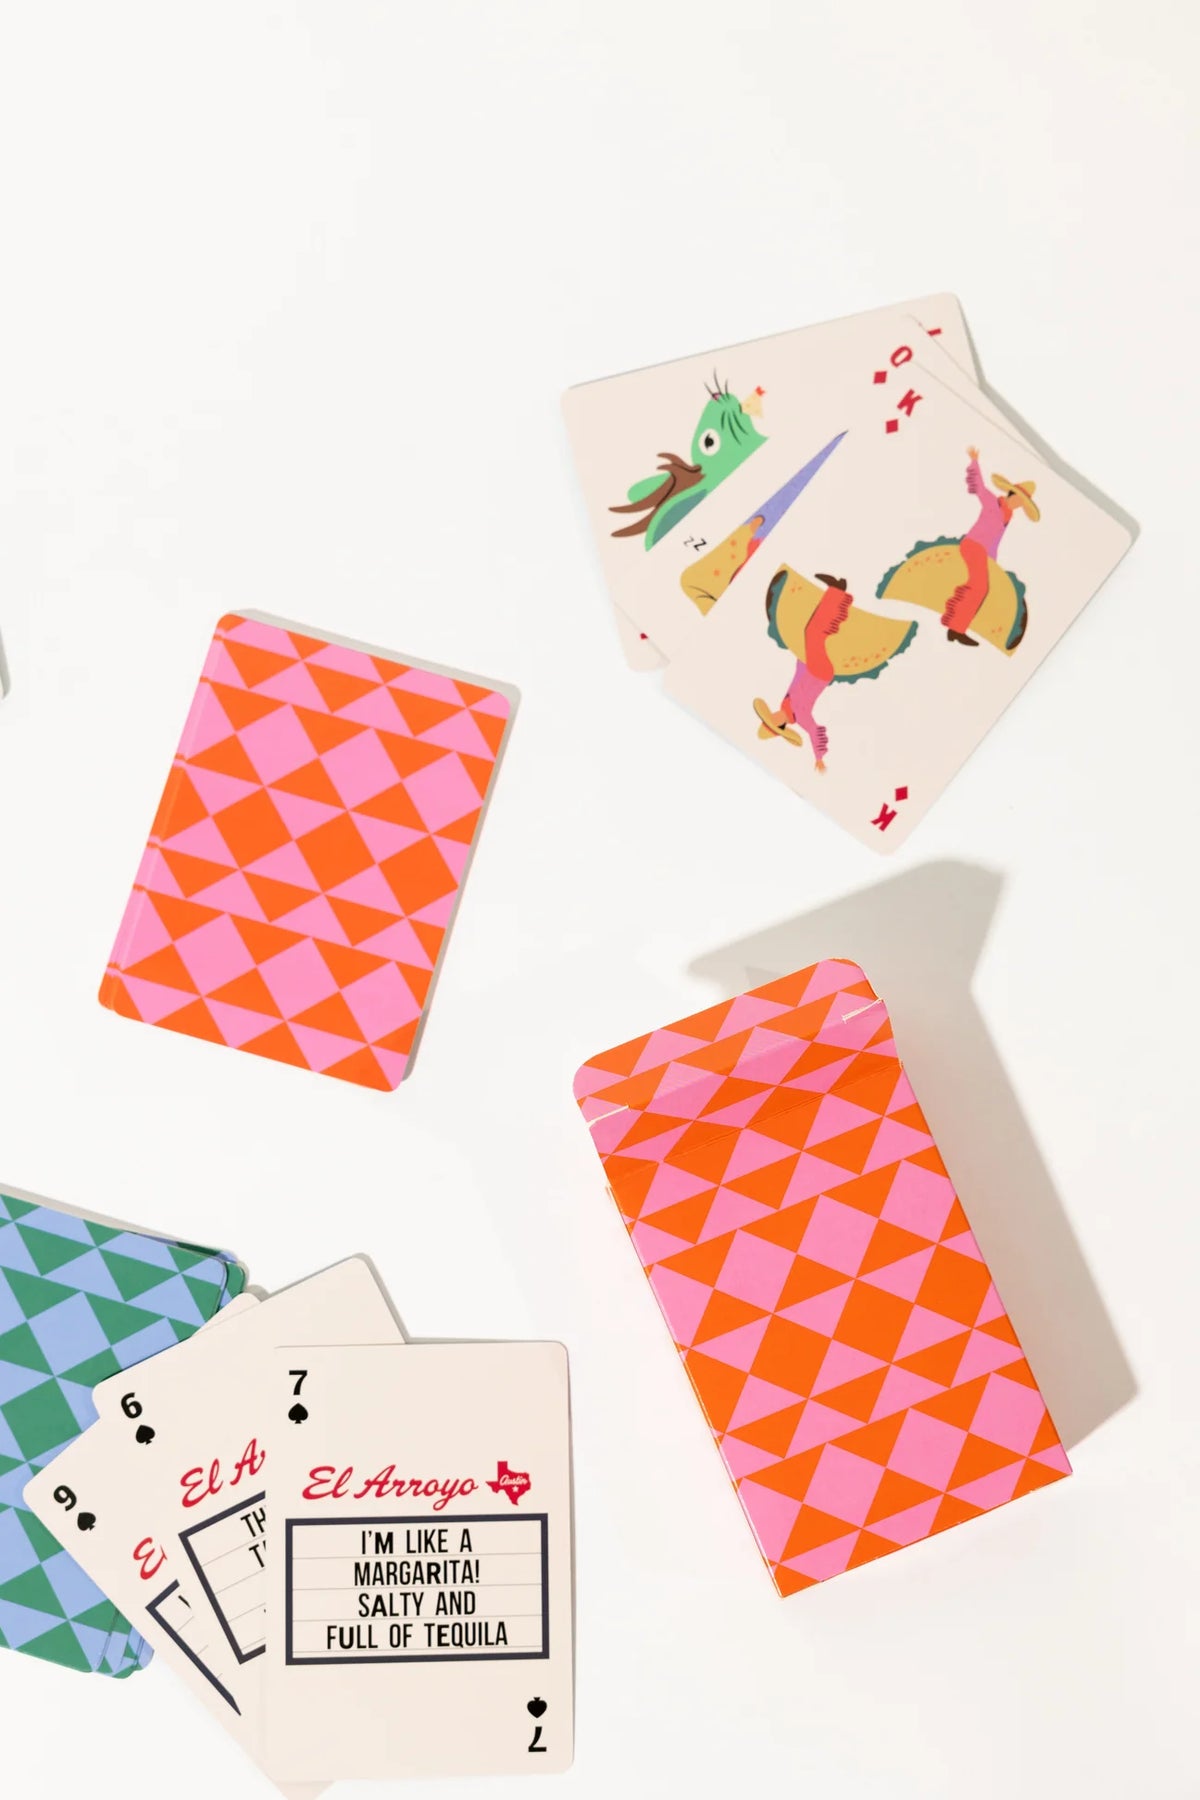 Two-Deck Set Playing Cards